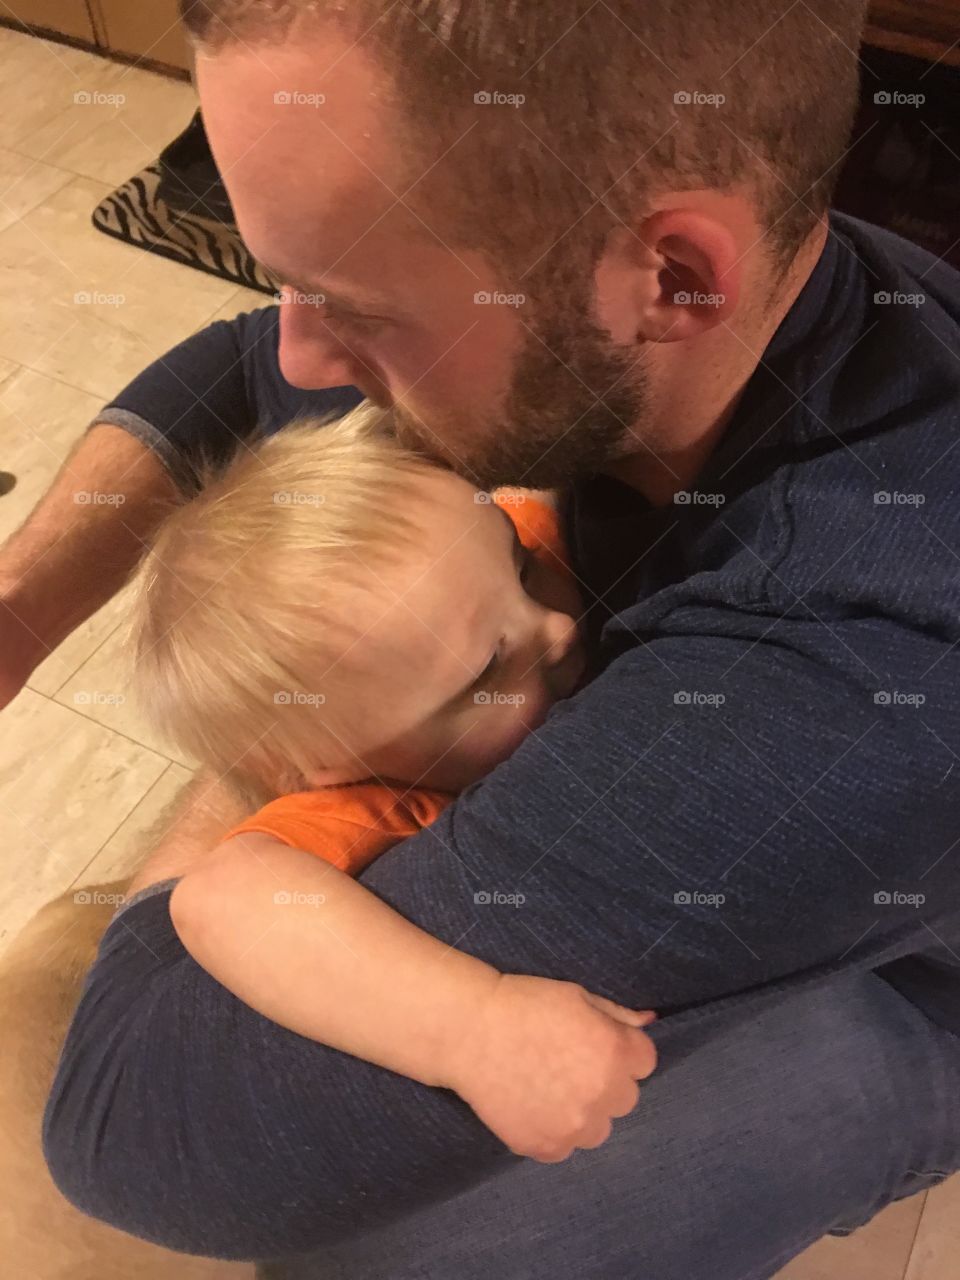 That baby sure loves his daddy